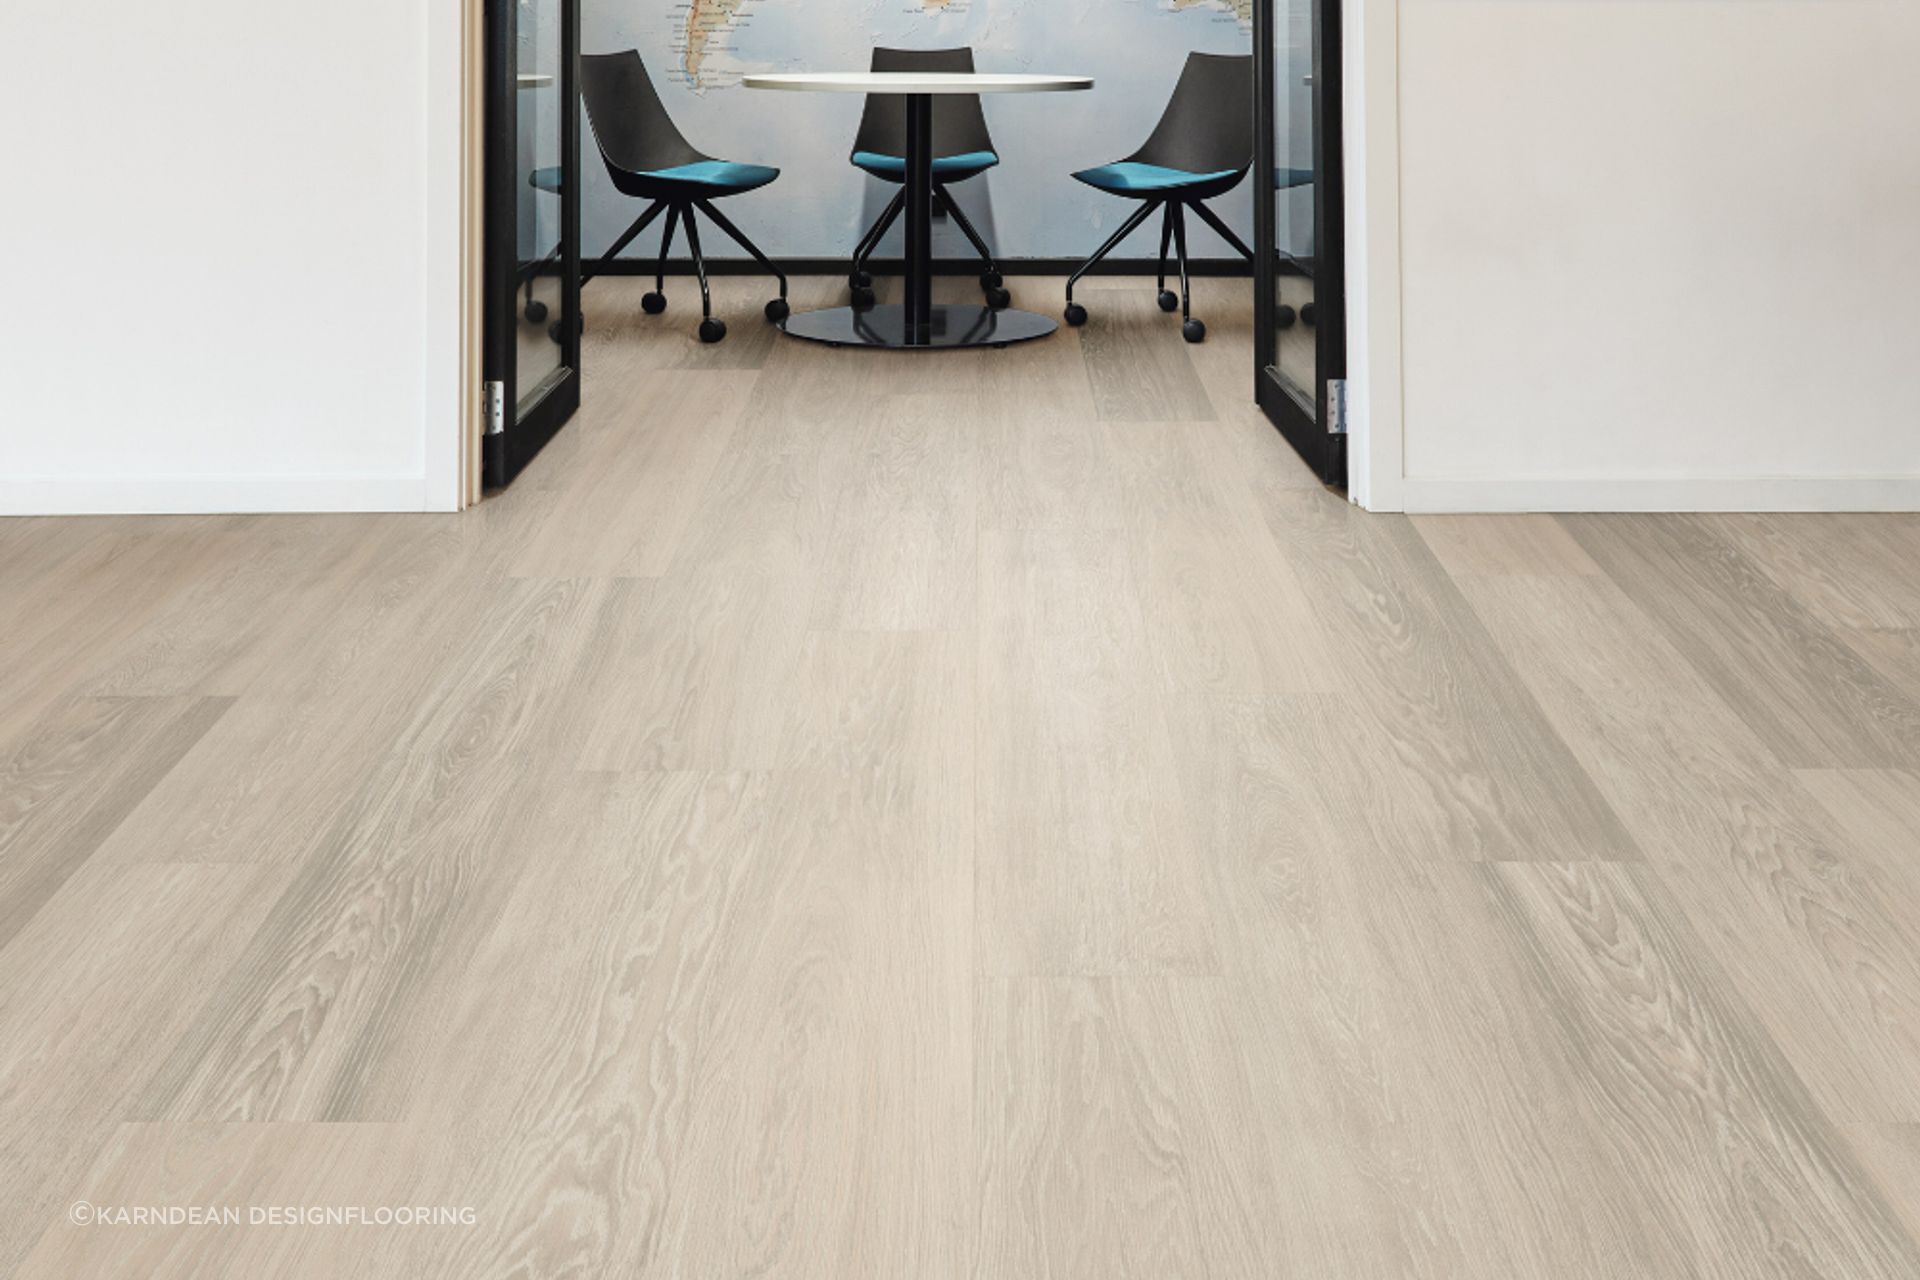 Vinyl plank flooring cost can depend on type used and the size of an area.